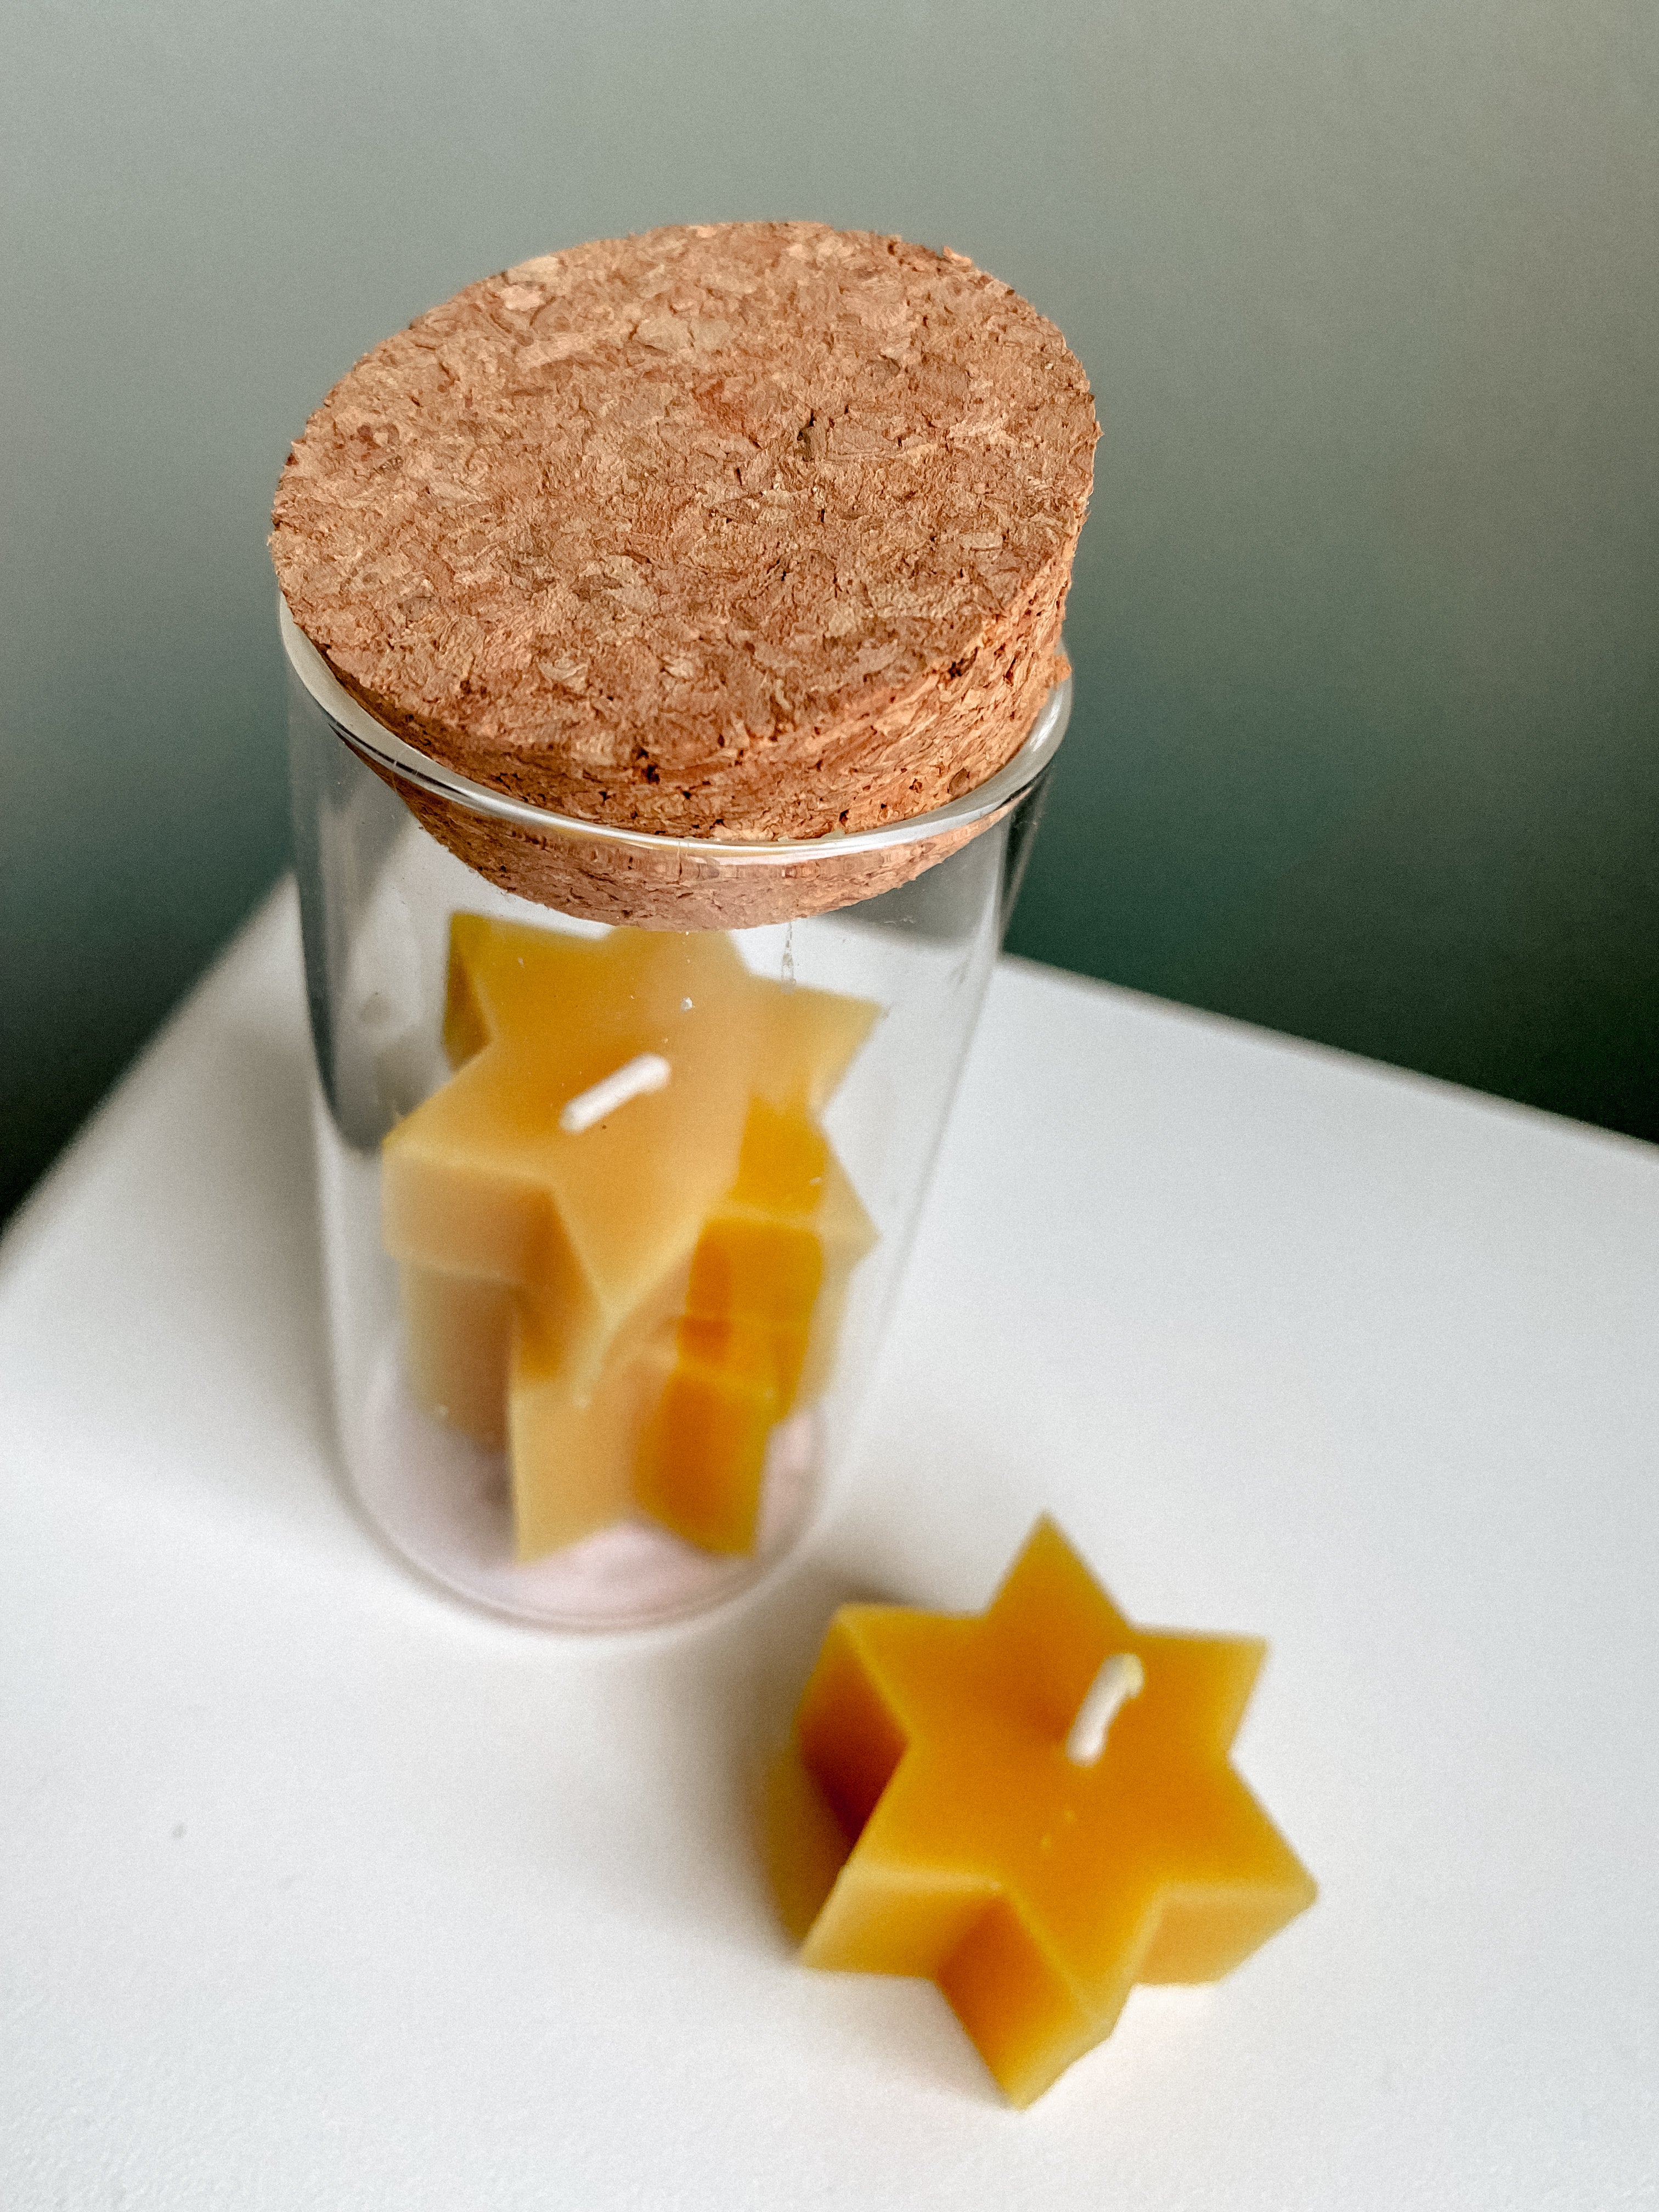 Star tea lights made of beeswax in a glass